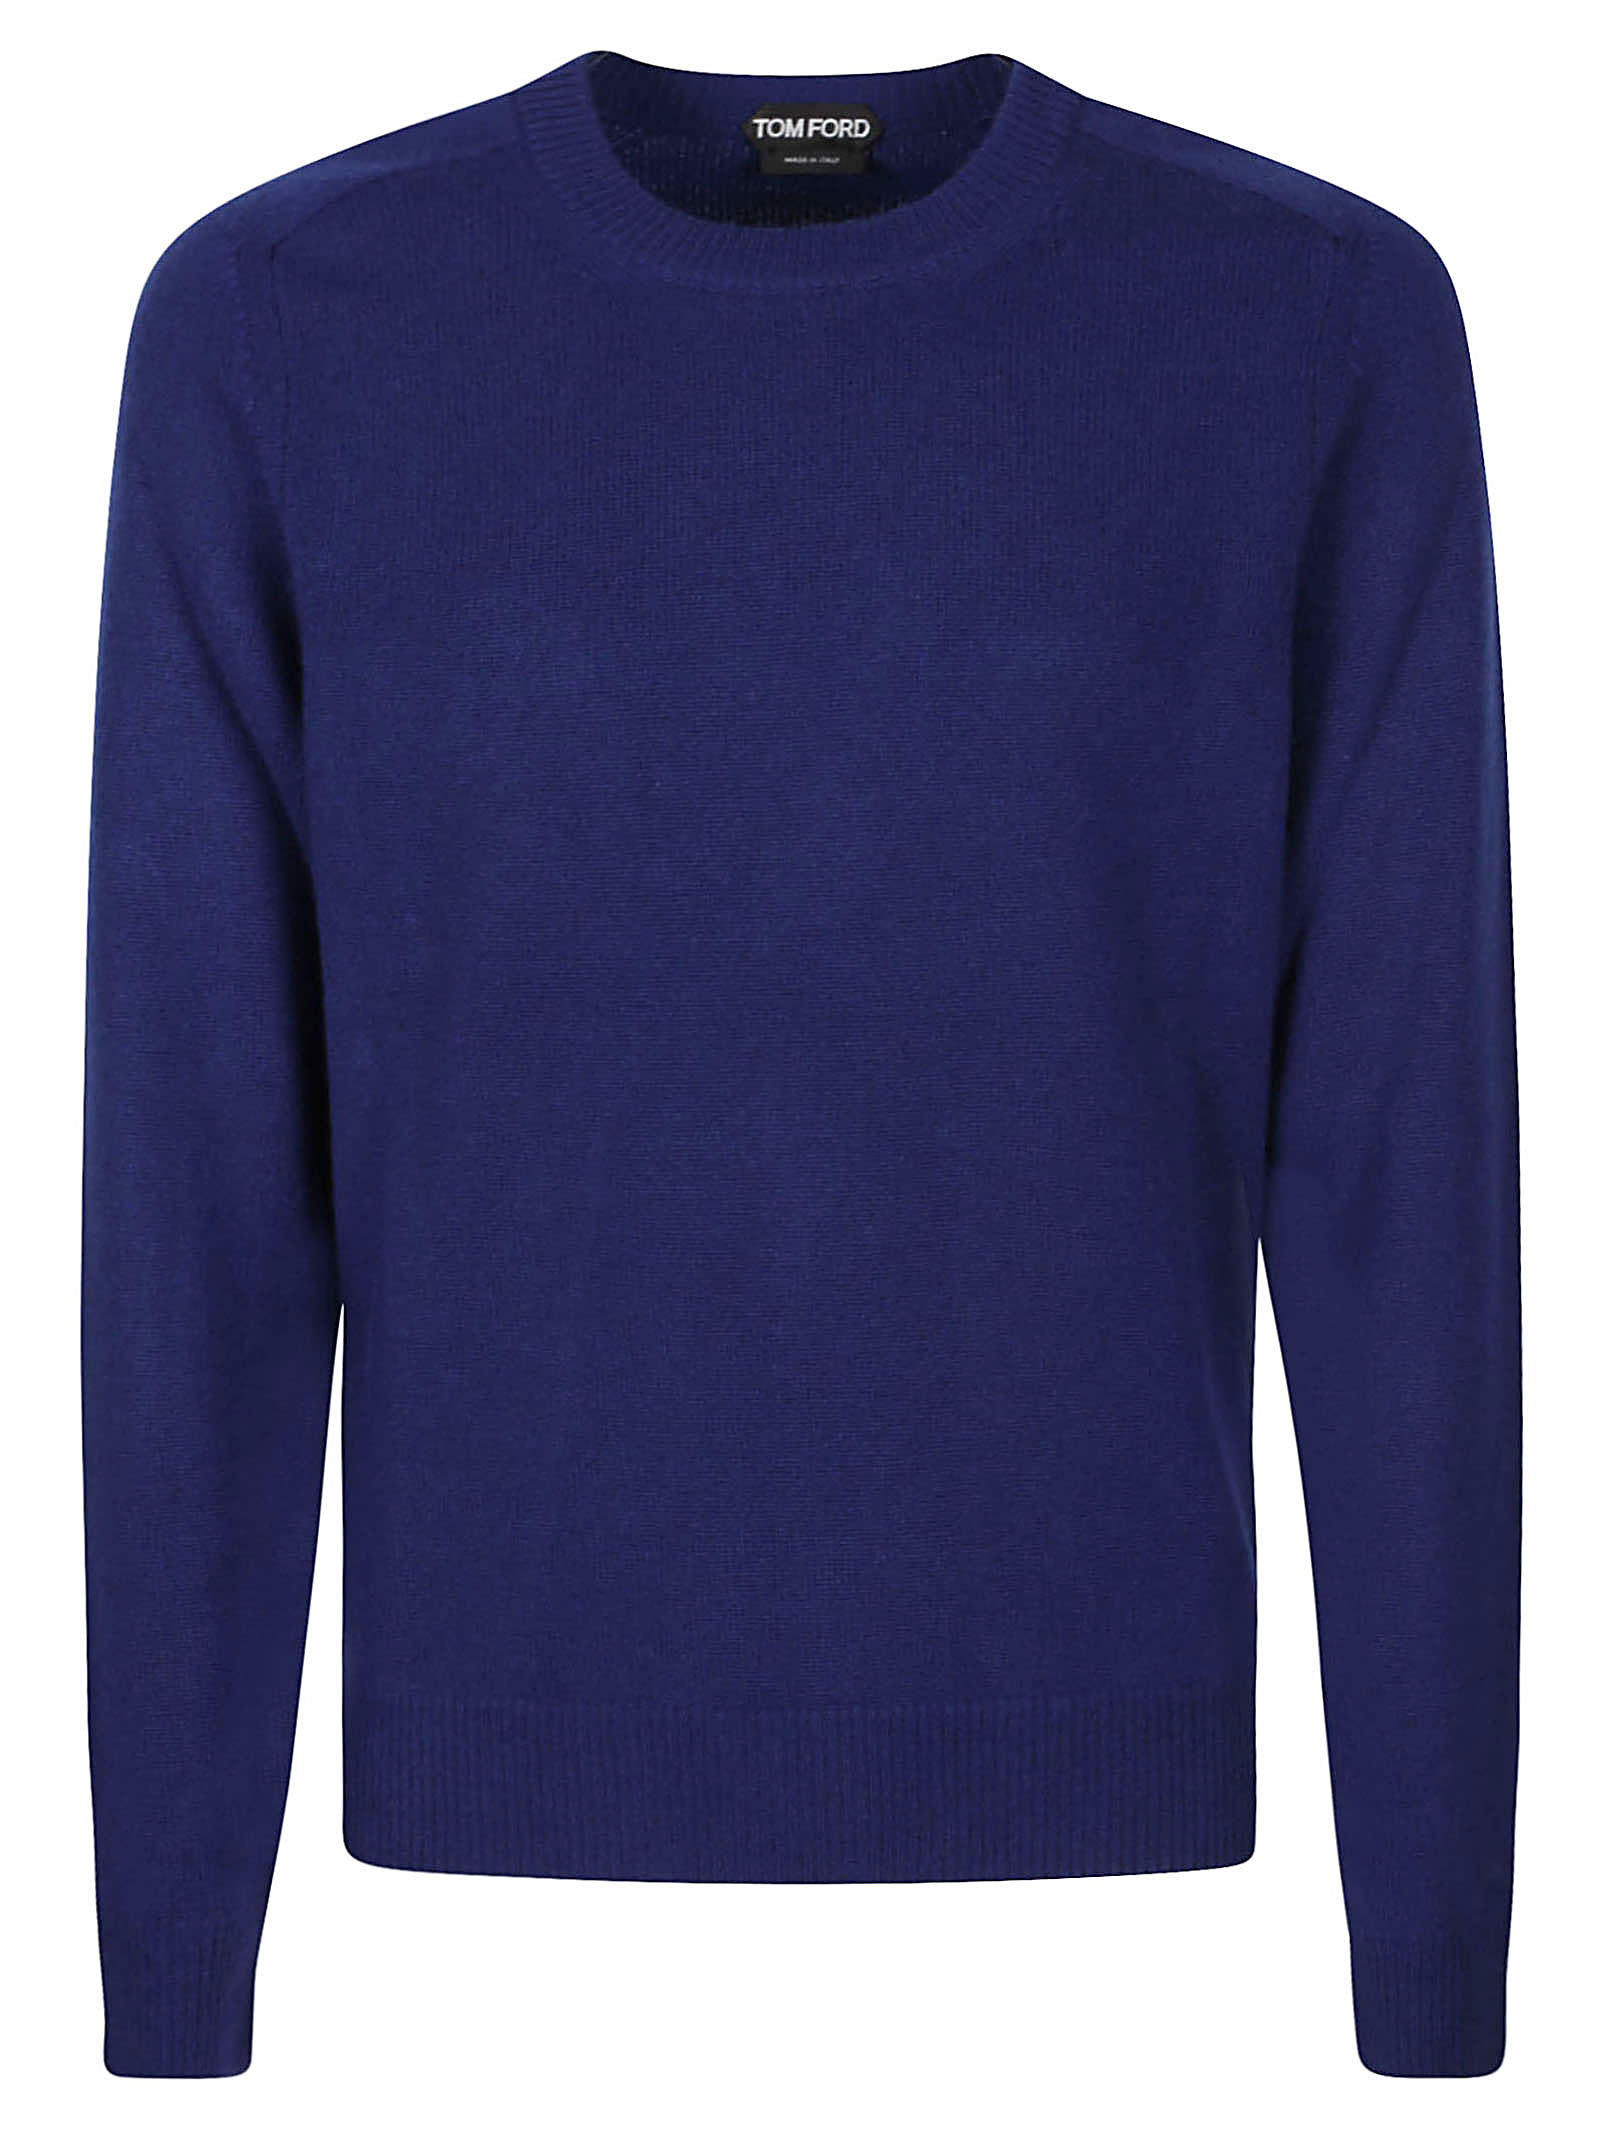 Tom Ford Cashmere Saddle Sweater In Dark Blue